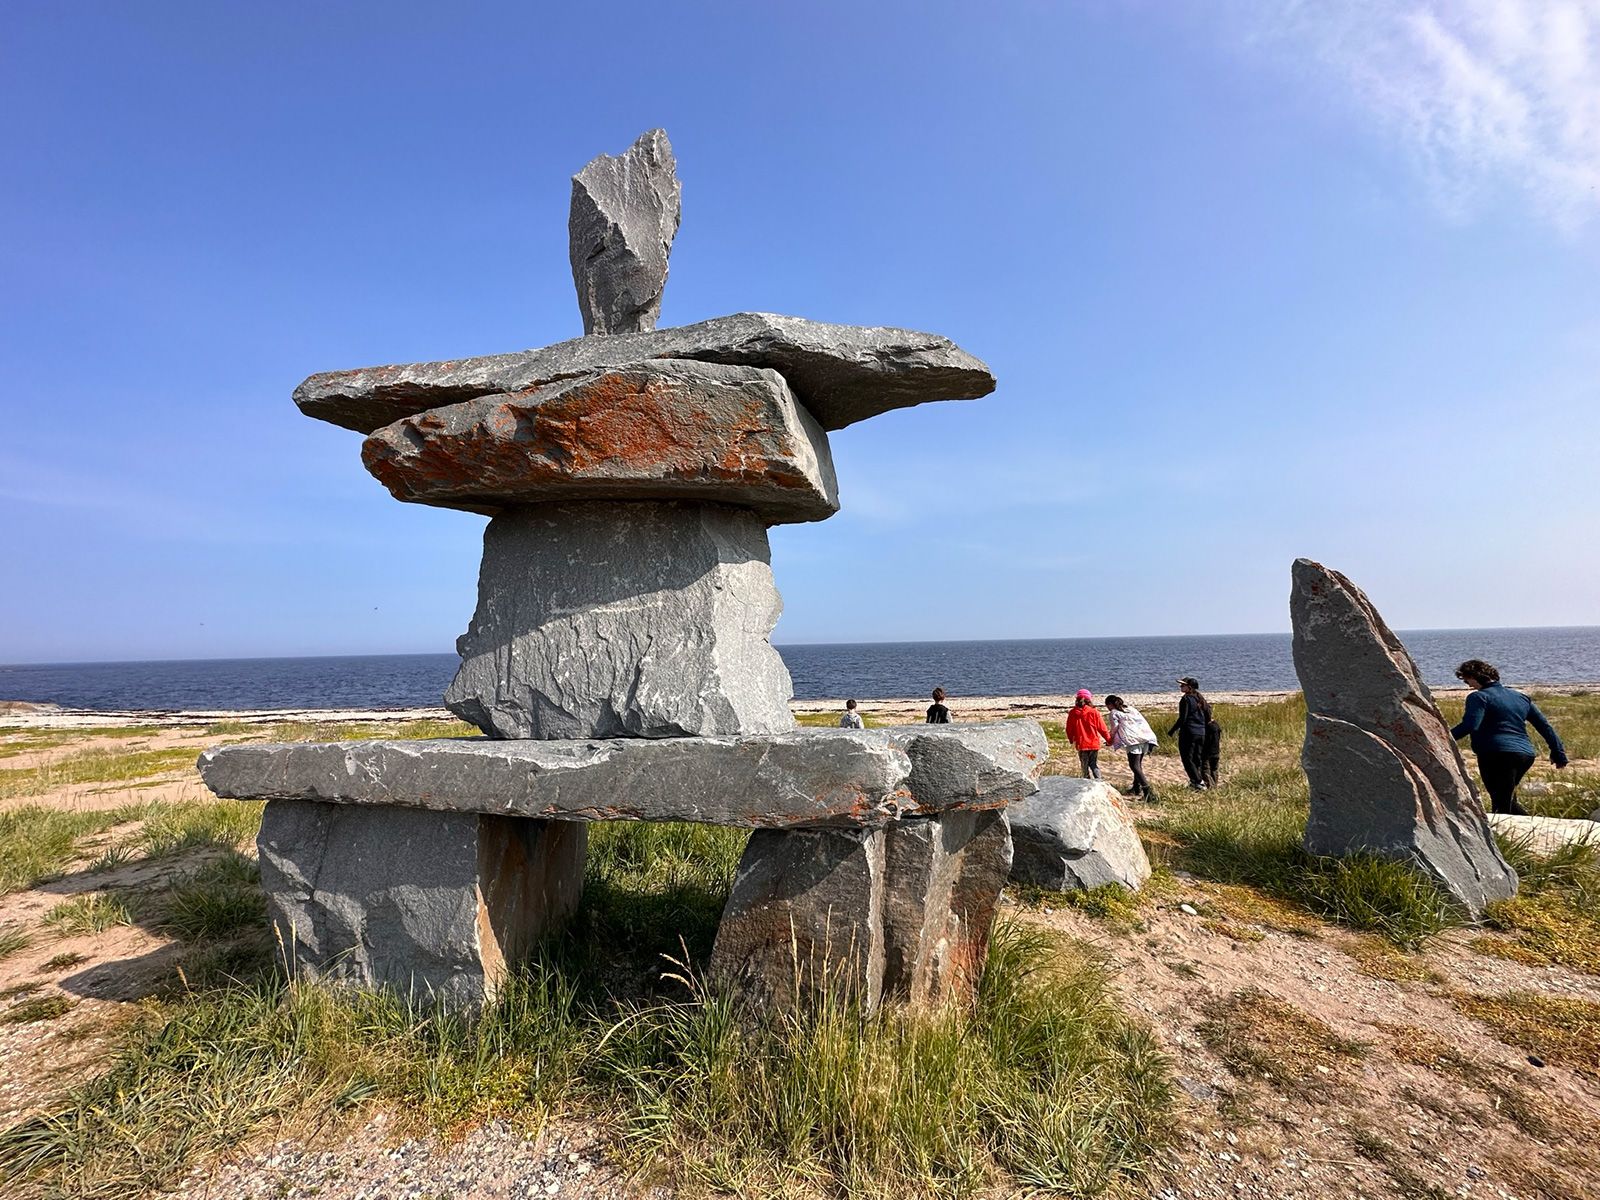 An Inukshuk, a structure of boulders piled to look like a person, fronts Churchill’s city beach.